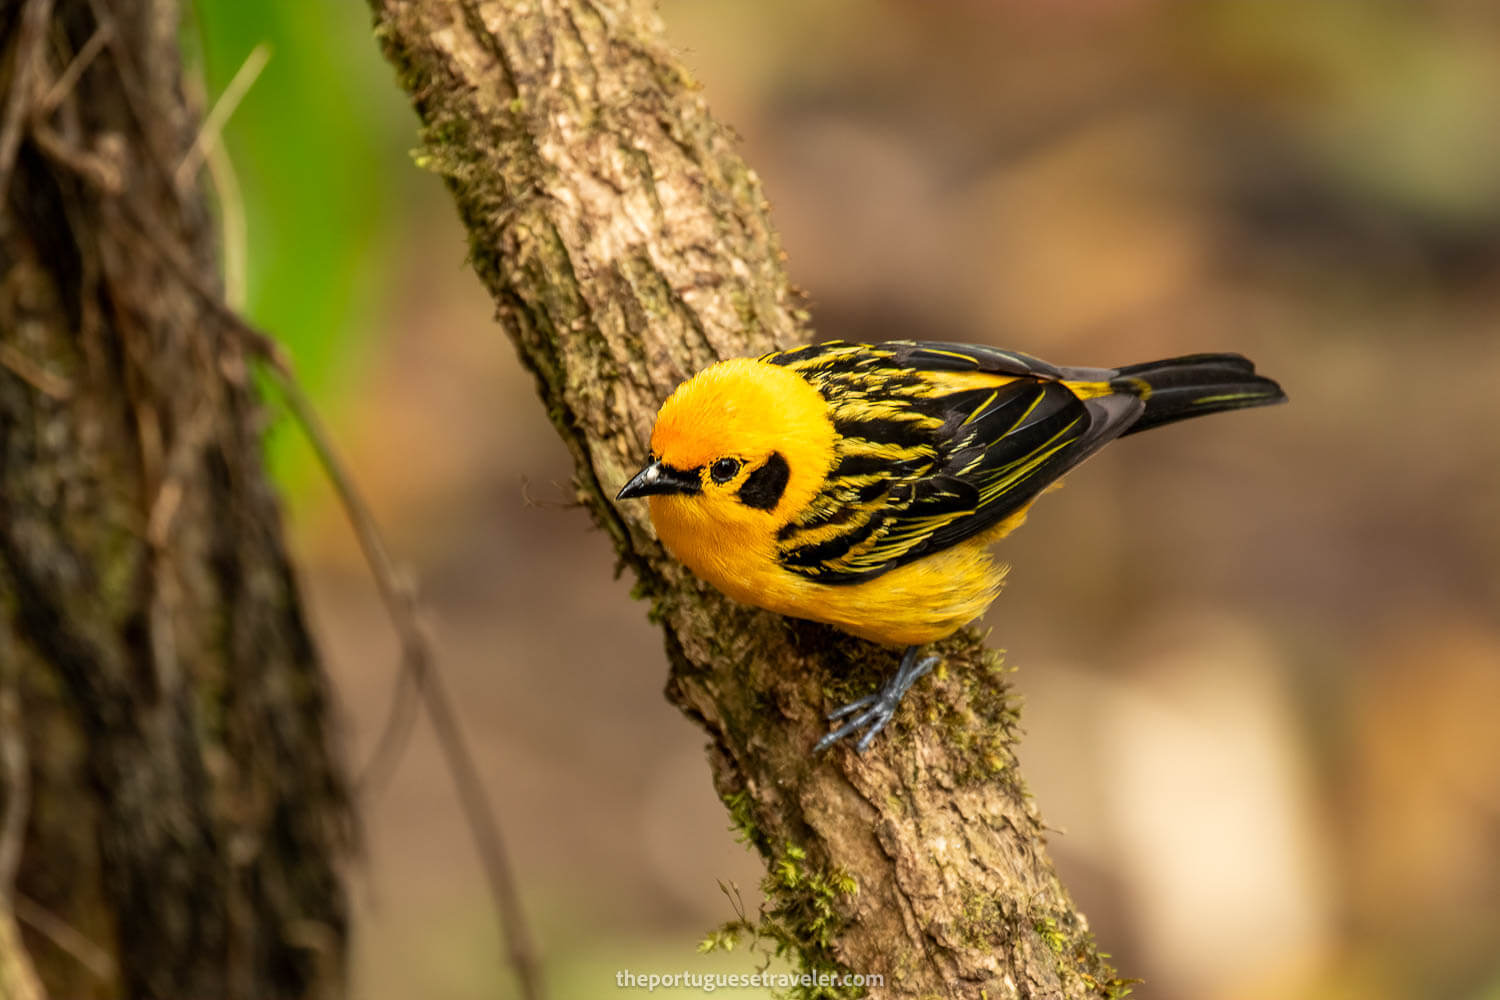 A Golden Tanager on the Birdwatching Tour in Mindo